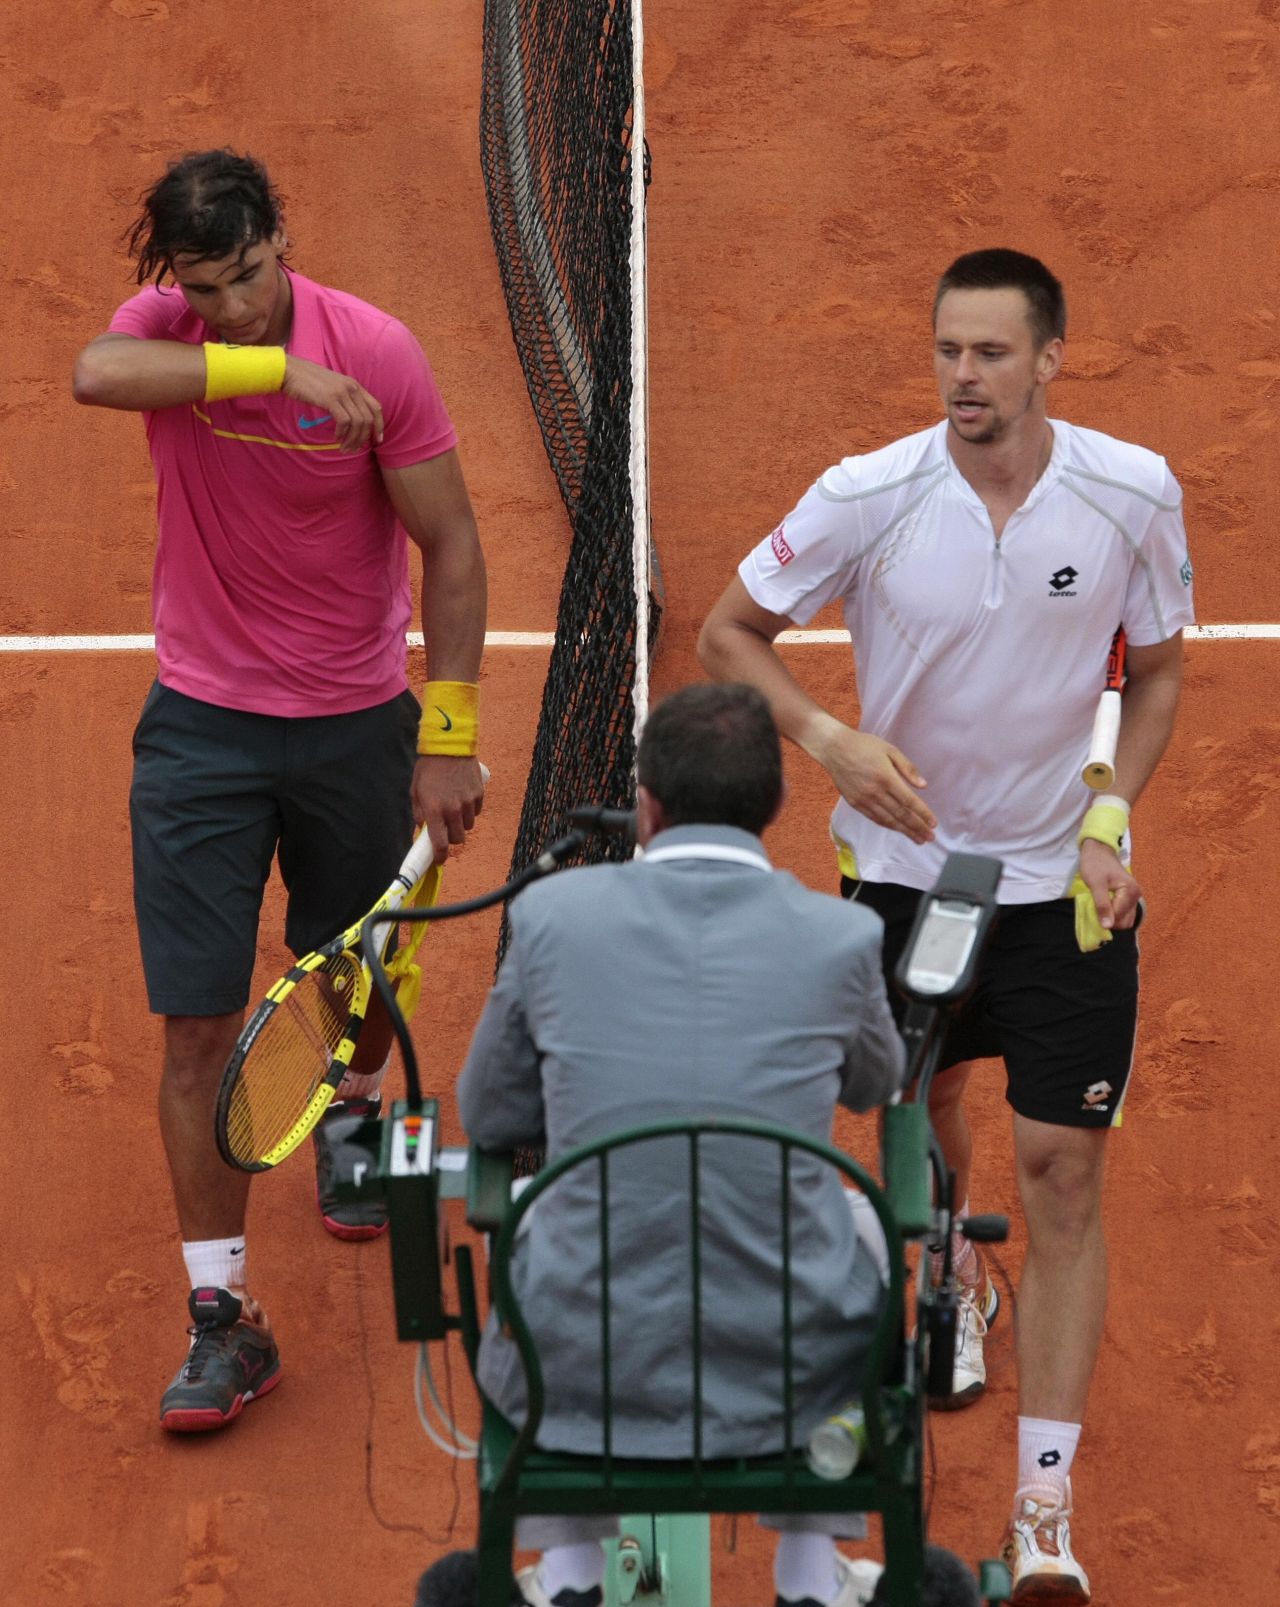 Robin Soderling is the other player who has downed Nadal at the French Open, in 2009. 